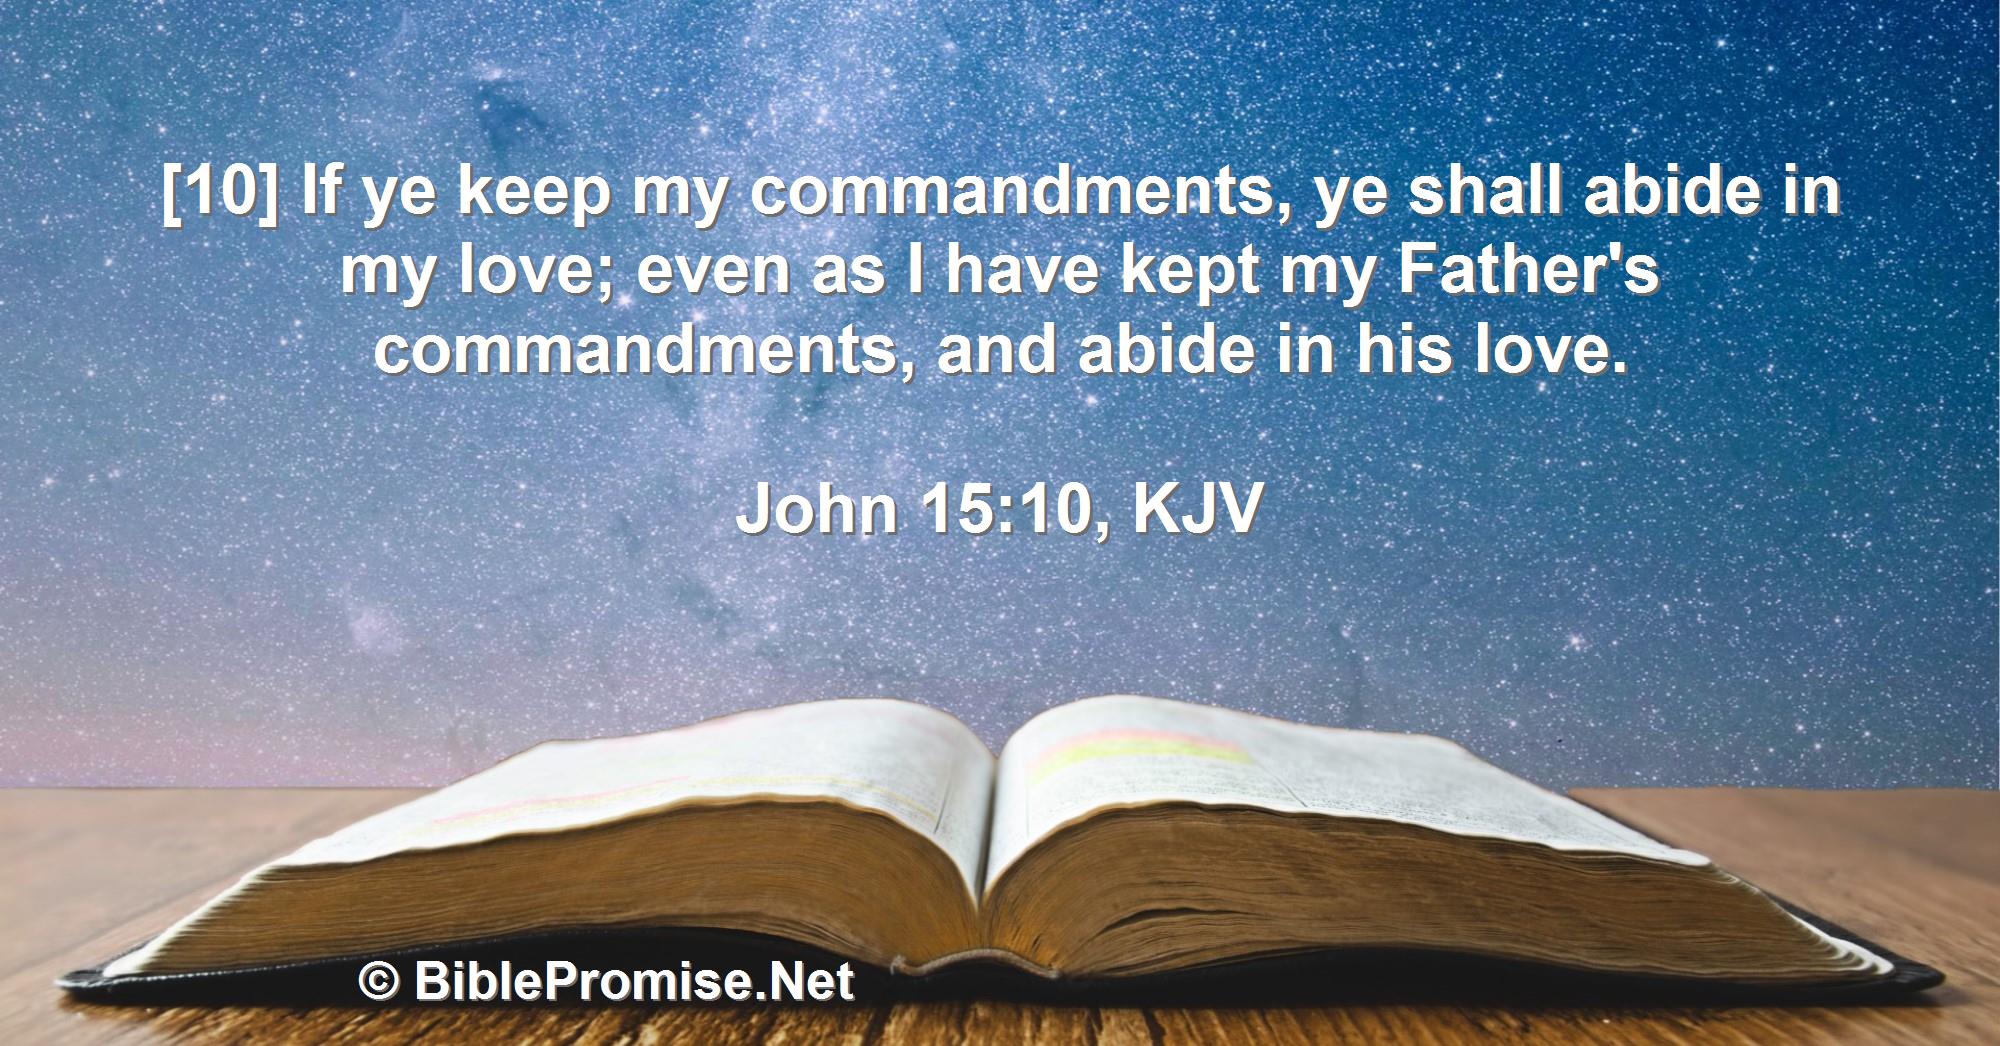 Saturday, September 17, 2022 - John 15:10 (KJV) - Bible promise that if you keep God's commandments, you will abide in His love.